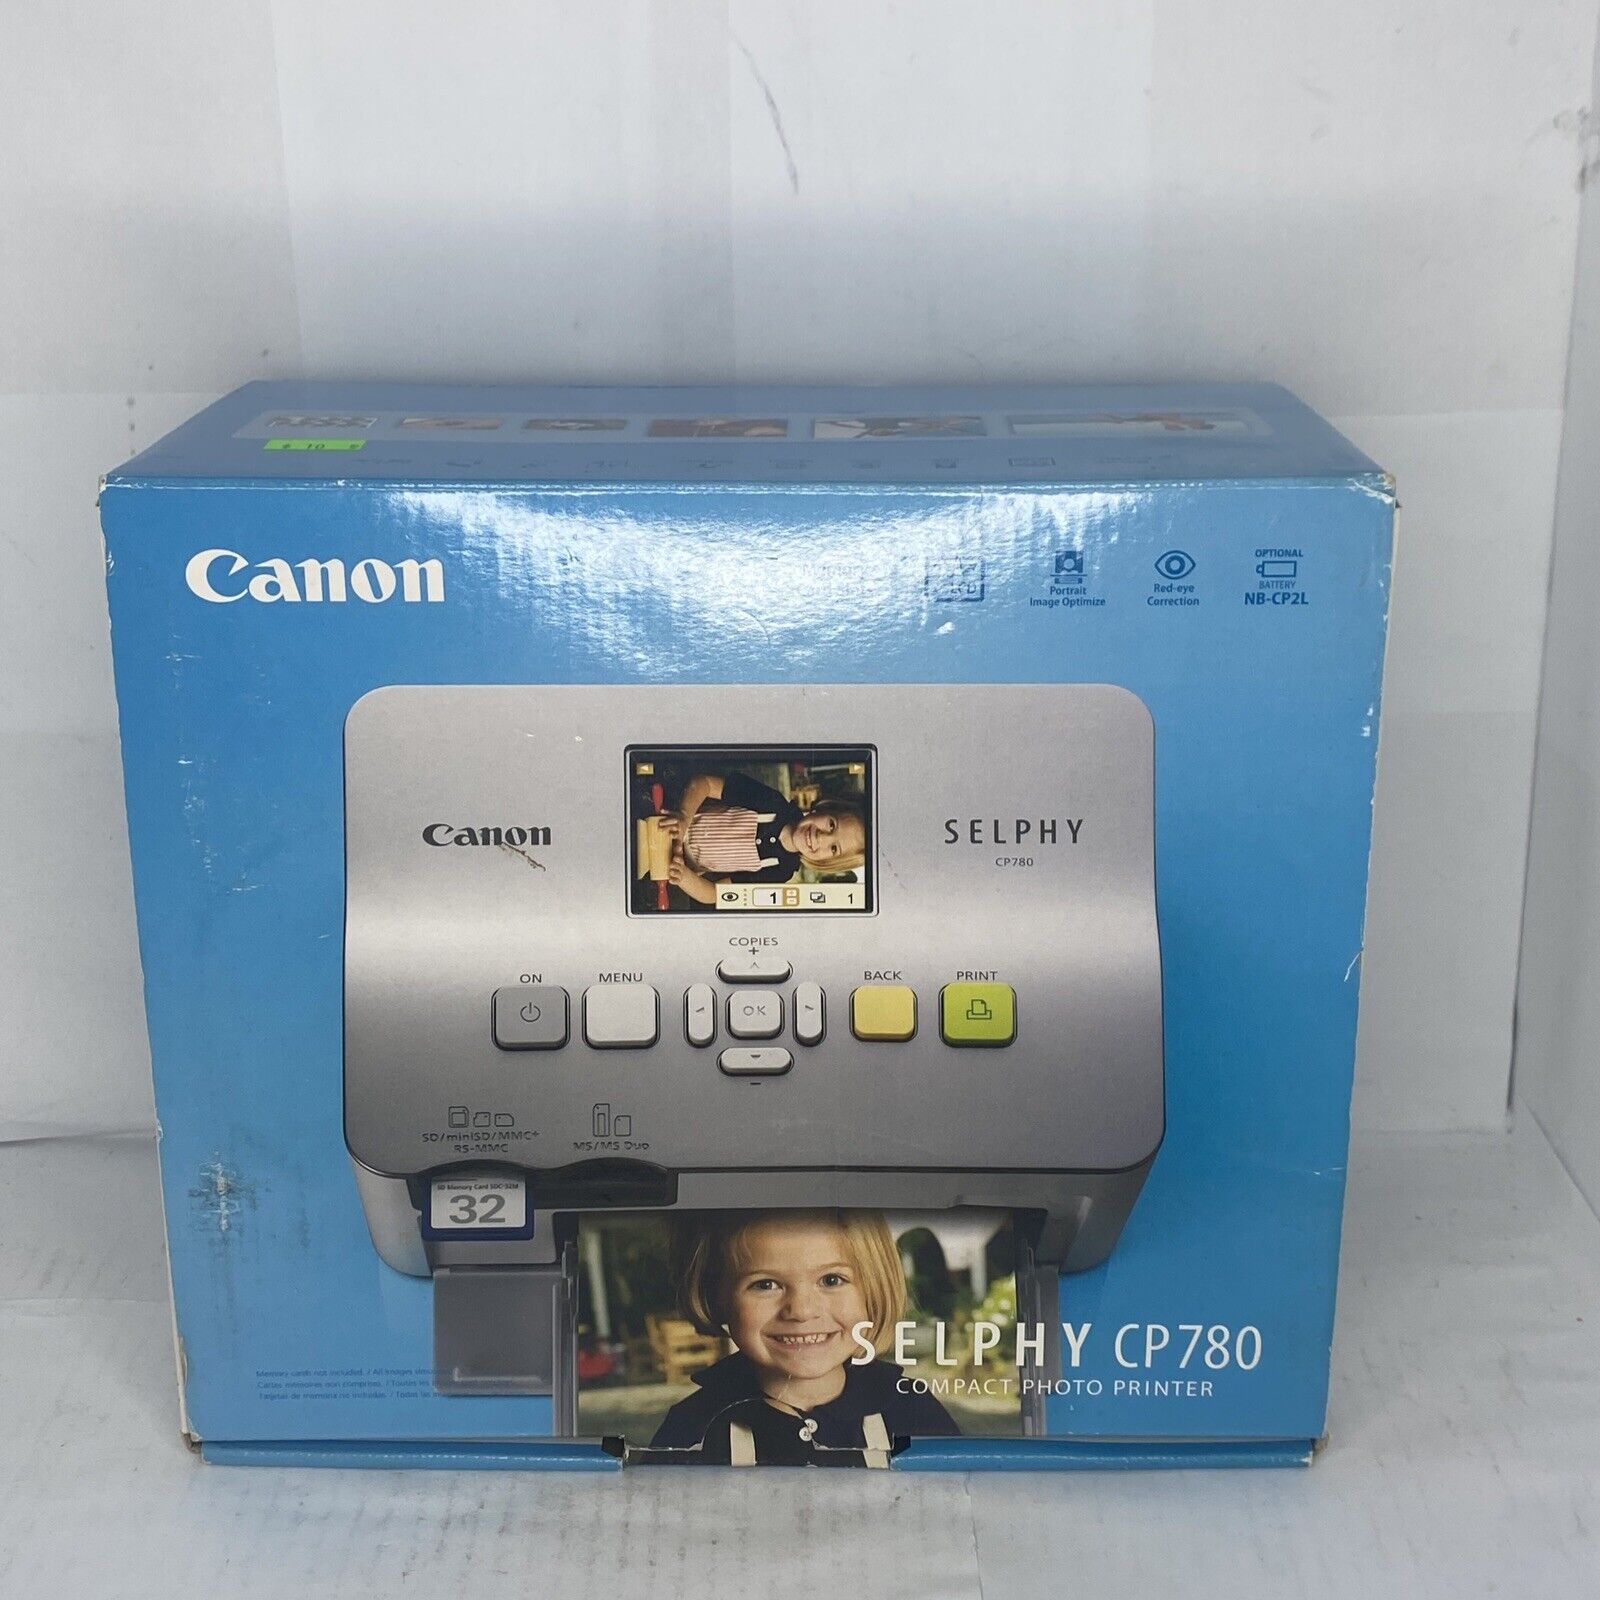 CANON CP780 SELPHY SILVER COMPACT DIGITAL THERMAL PHOTO PRINTER Tested